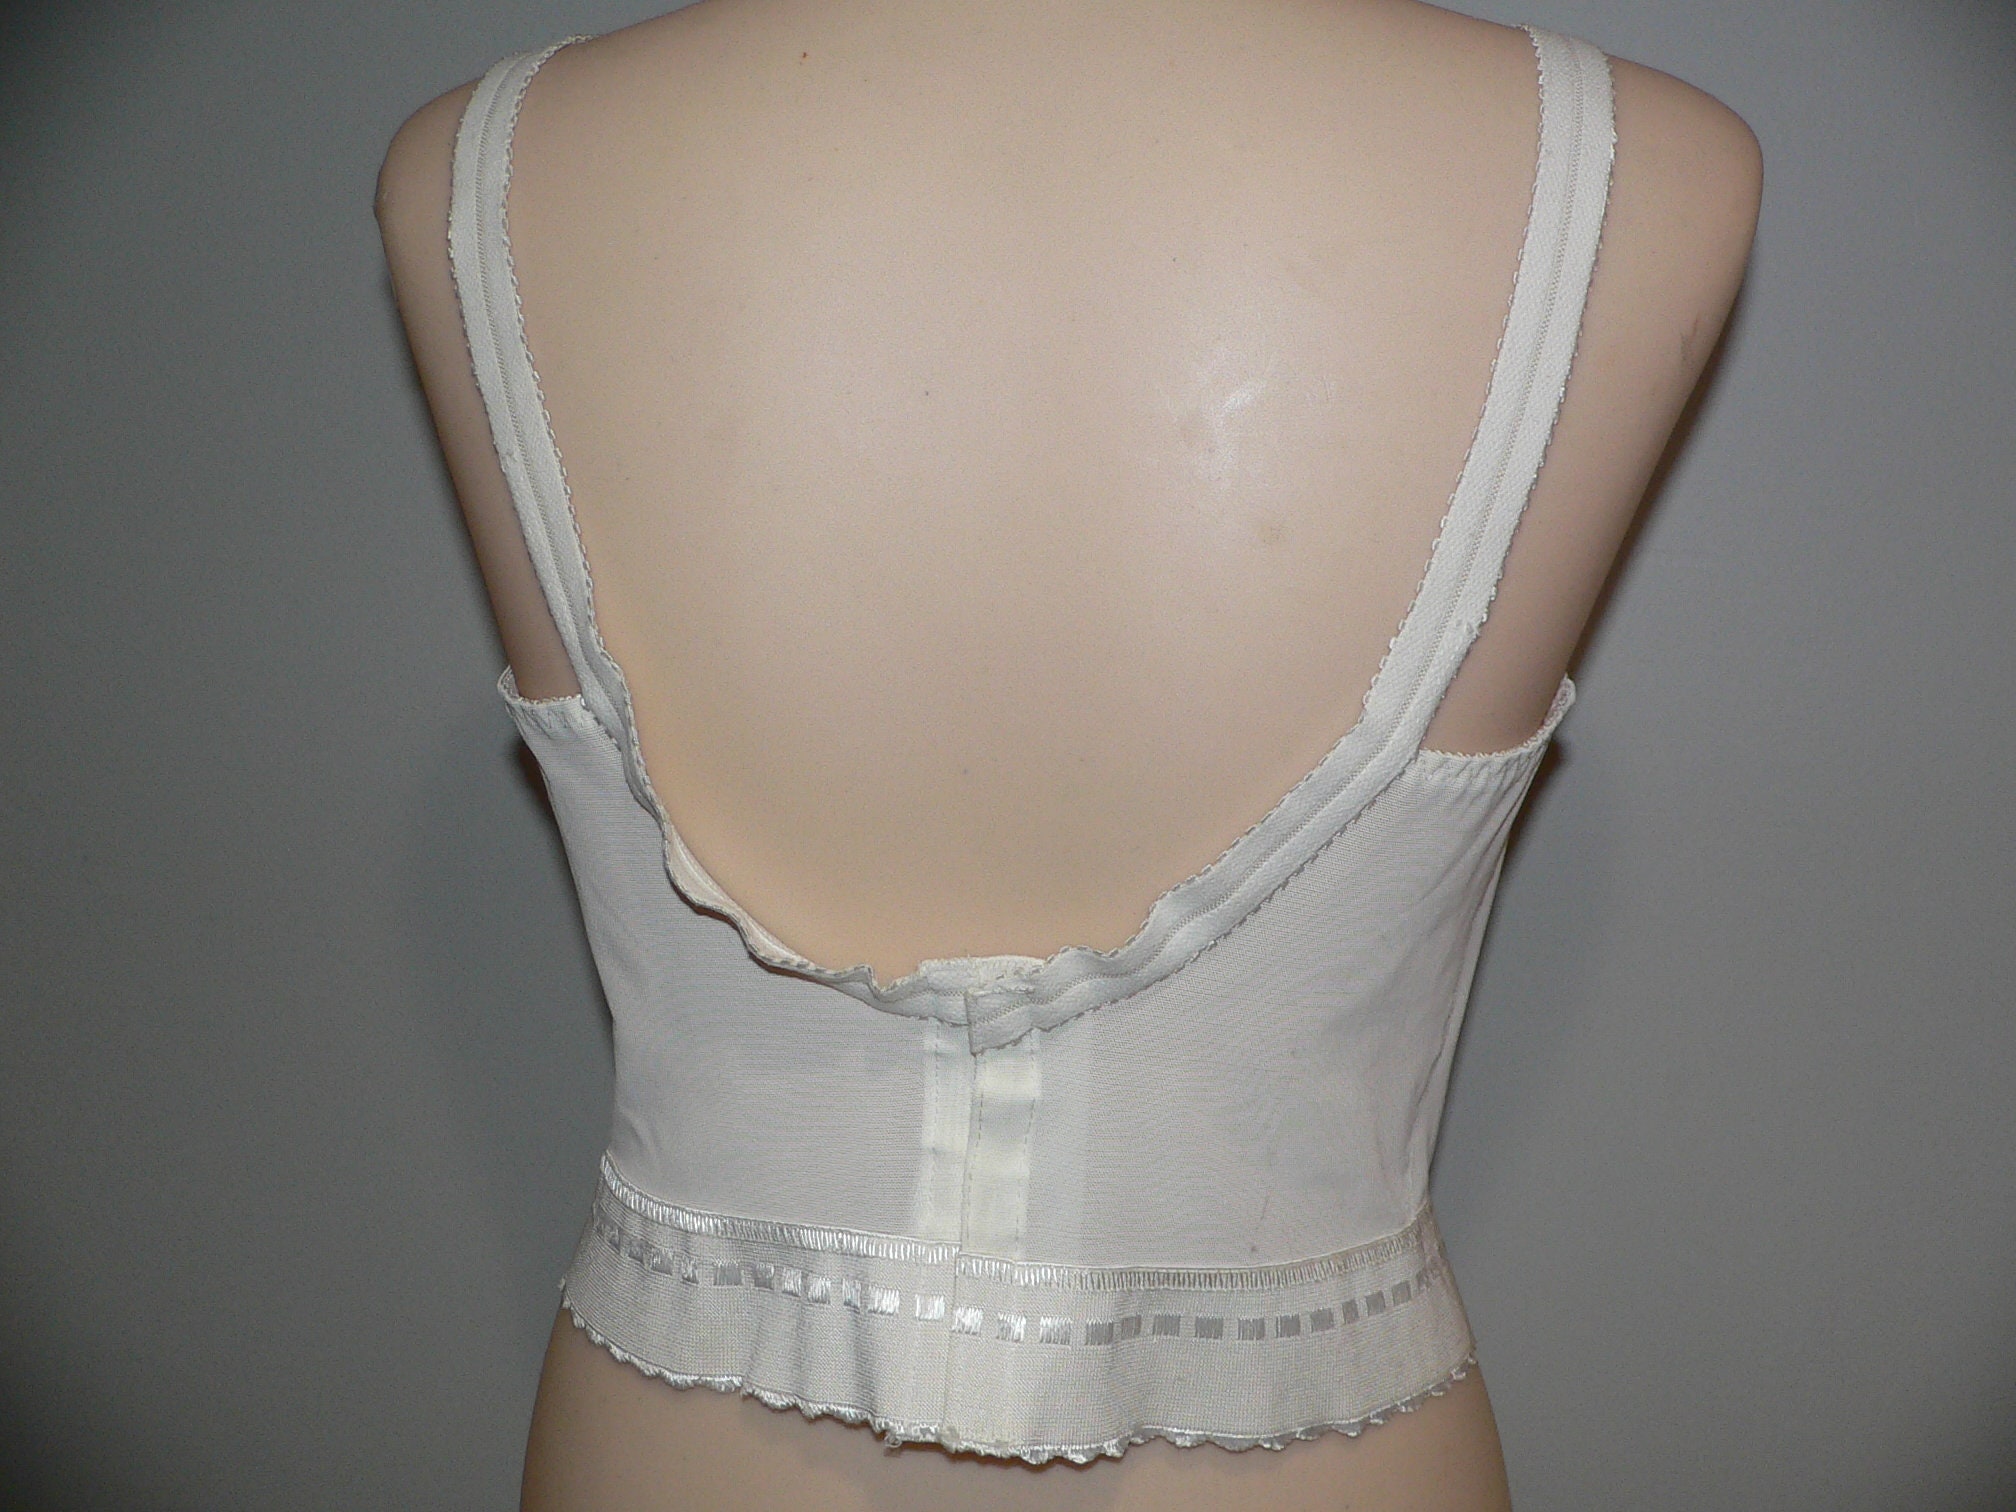 Vintage Long Line Bra by Marianne, NOS Size 40 B -  Canada